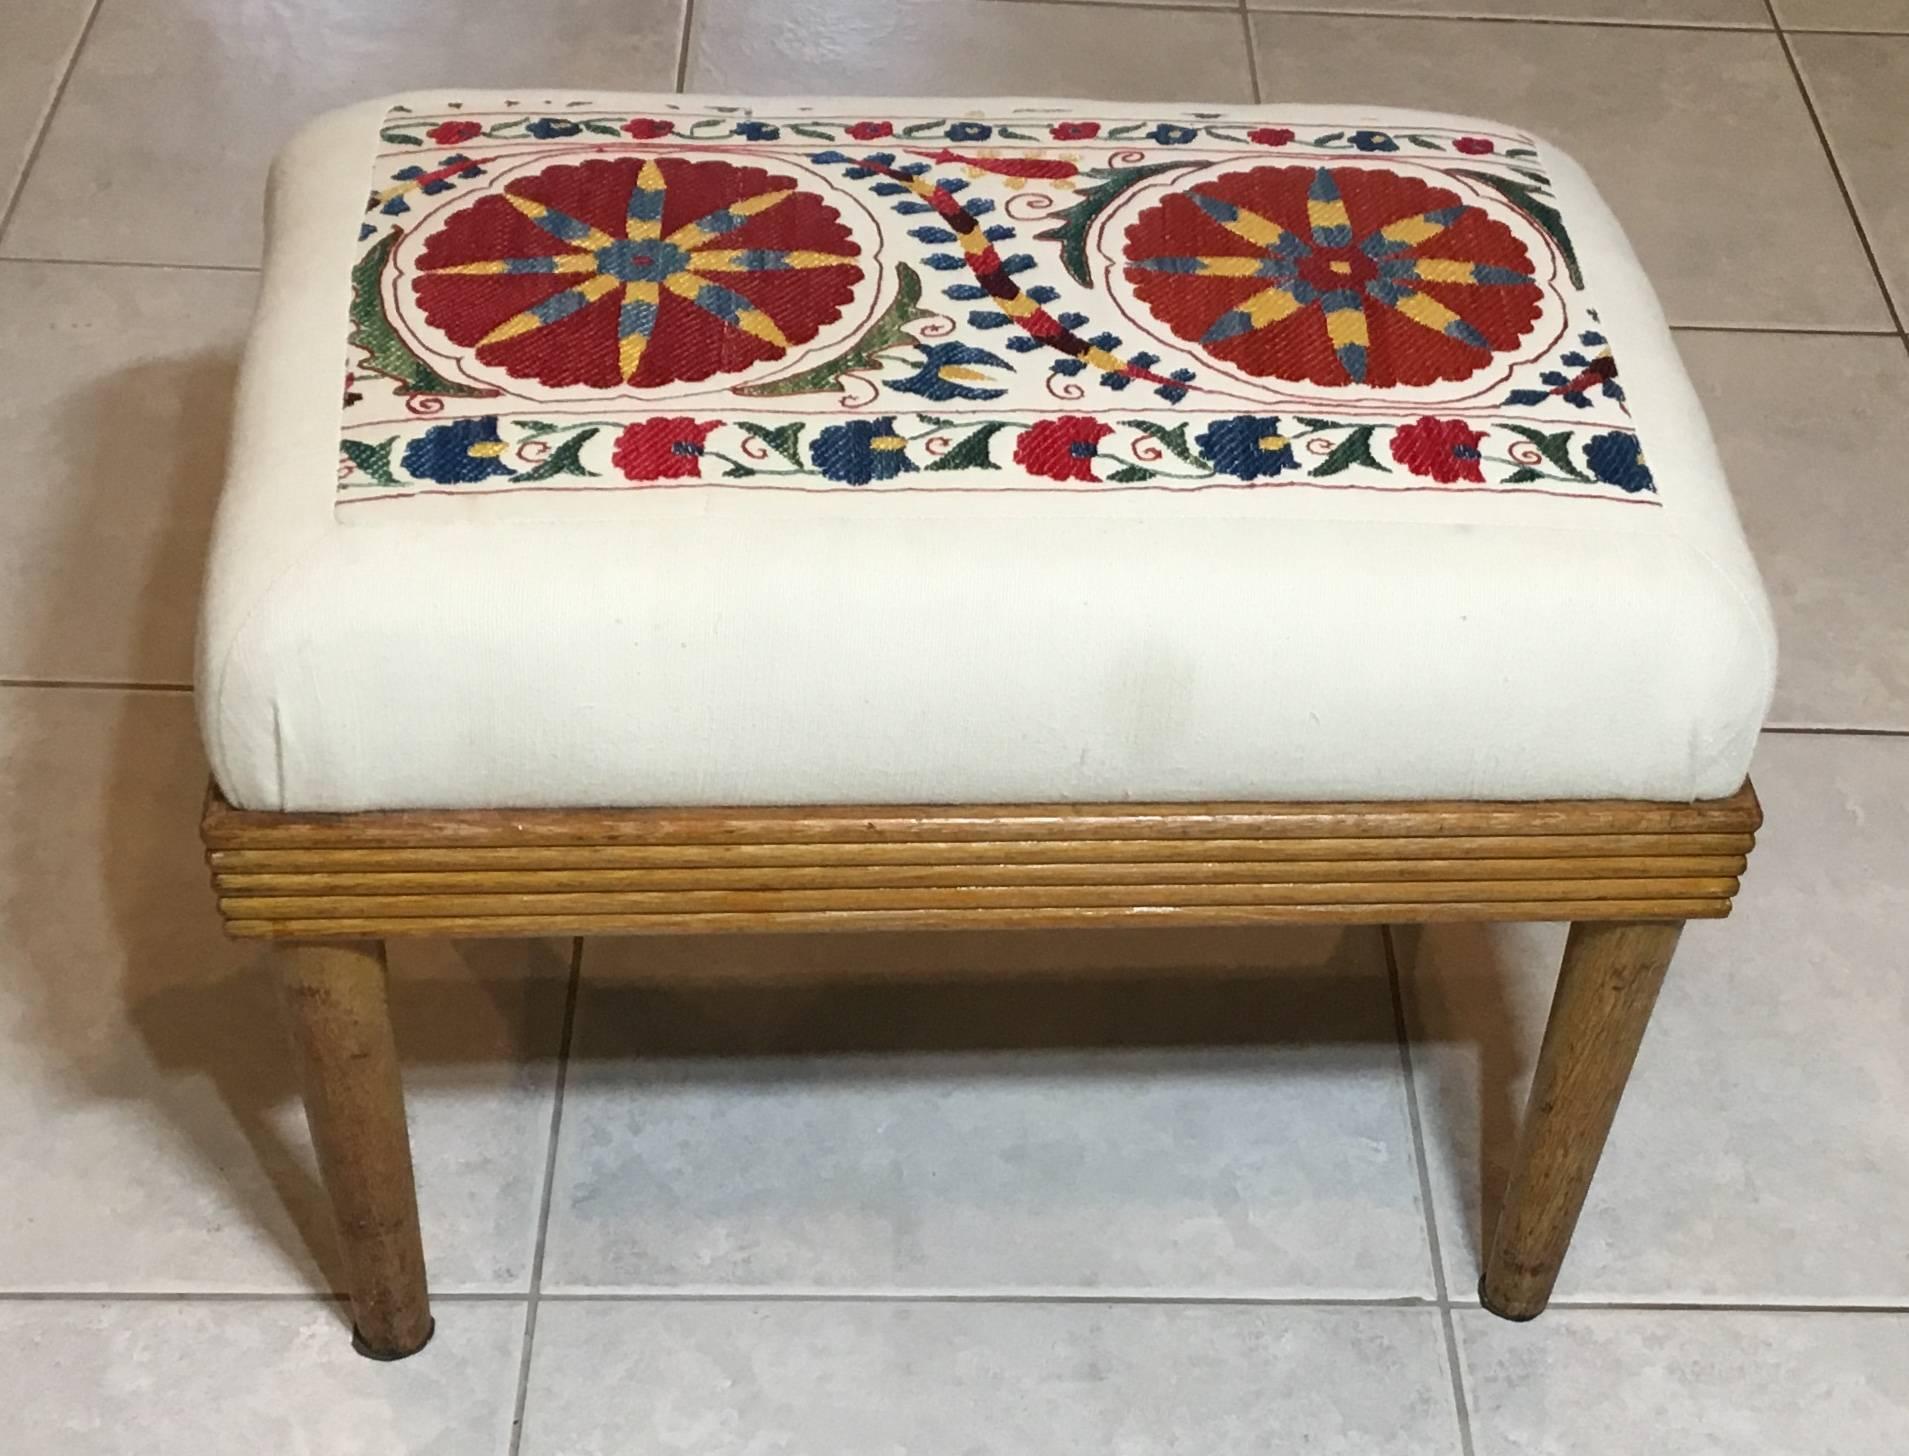 Elegant sitting stool made of wood, upholstered with beautiful hand embroidery silk Suzani textile, firm sitting, and great decorative vintage stool.
 